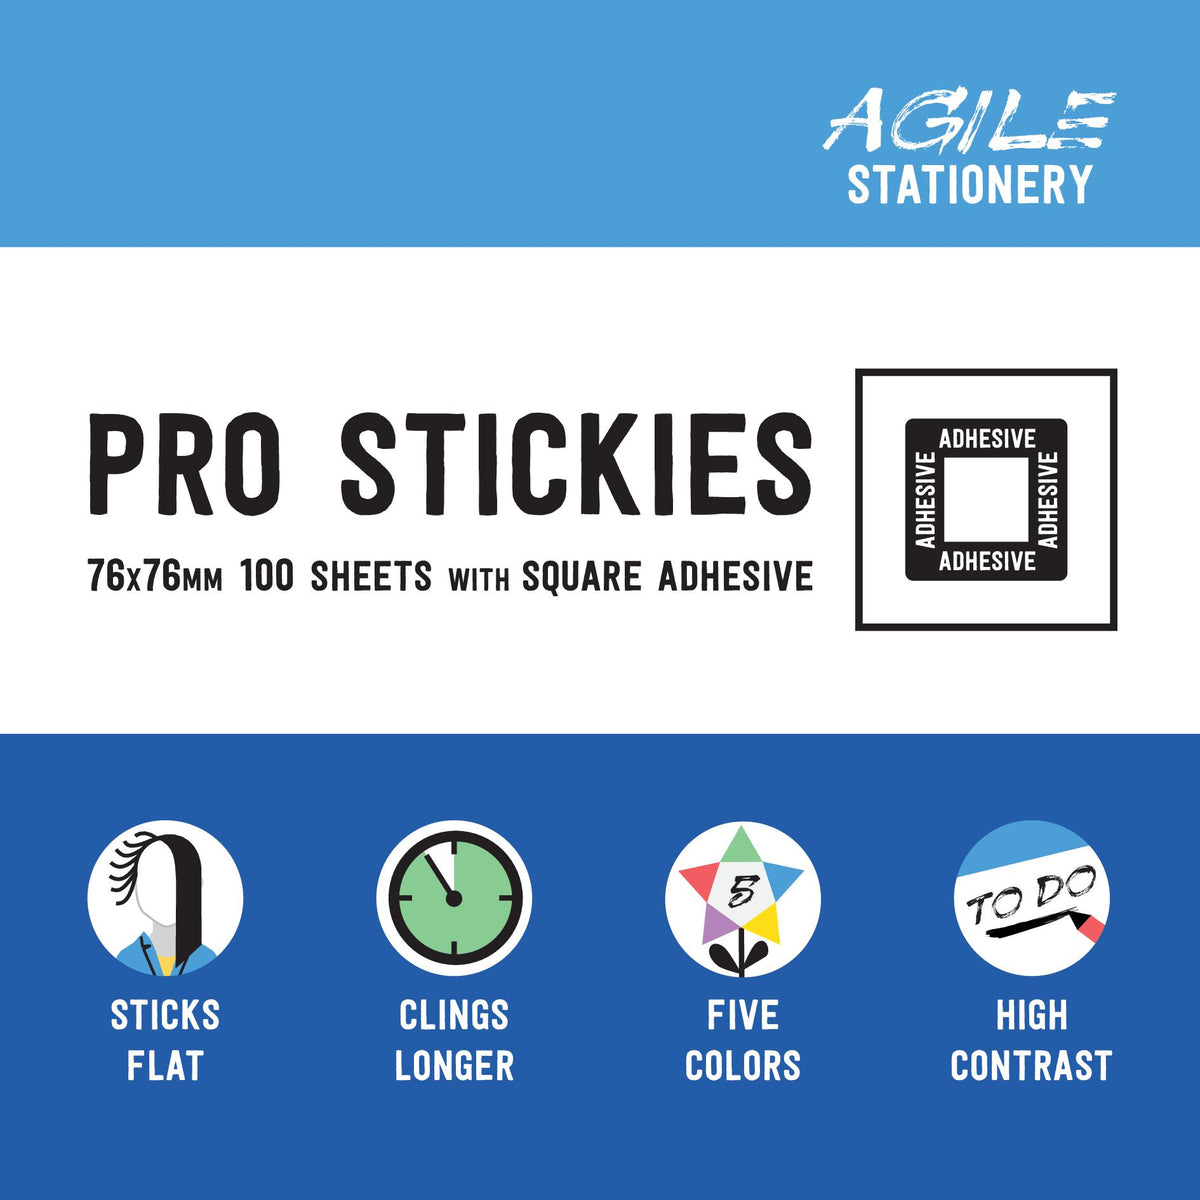 Stick Flat Pro Stickies with Square Adhesive (5 Pack) – Agile Stationery